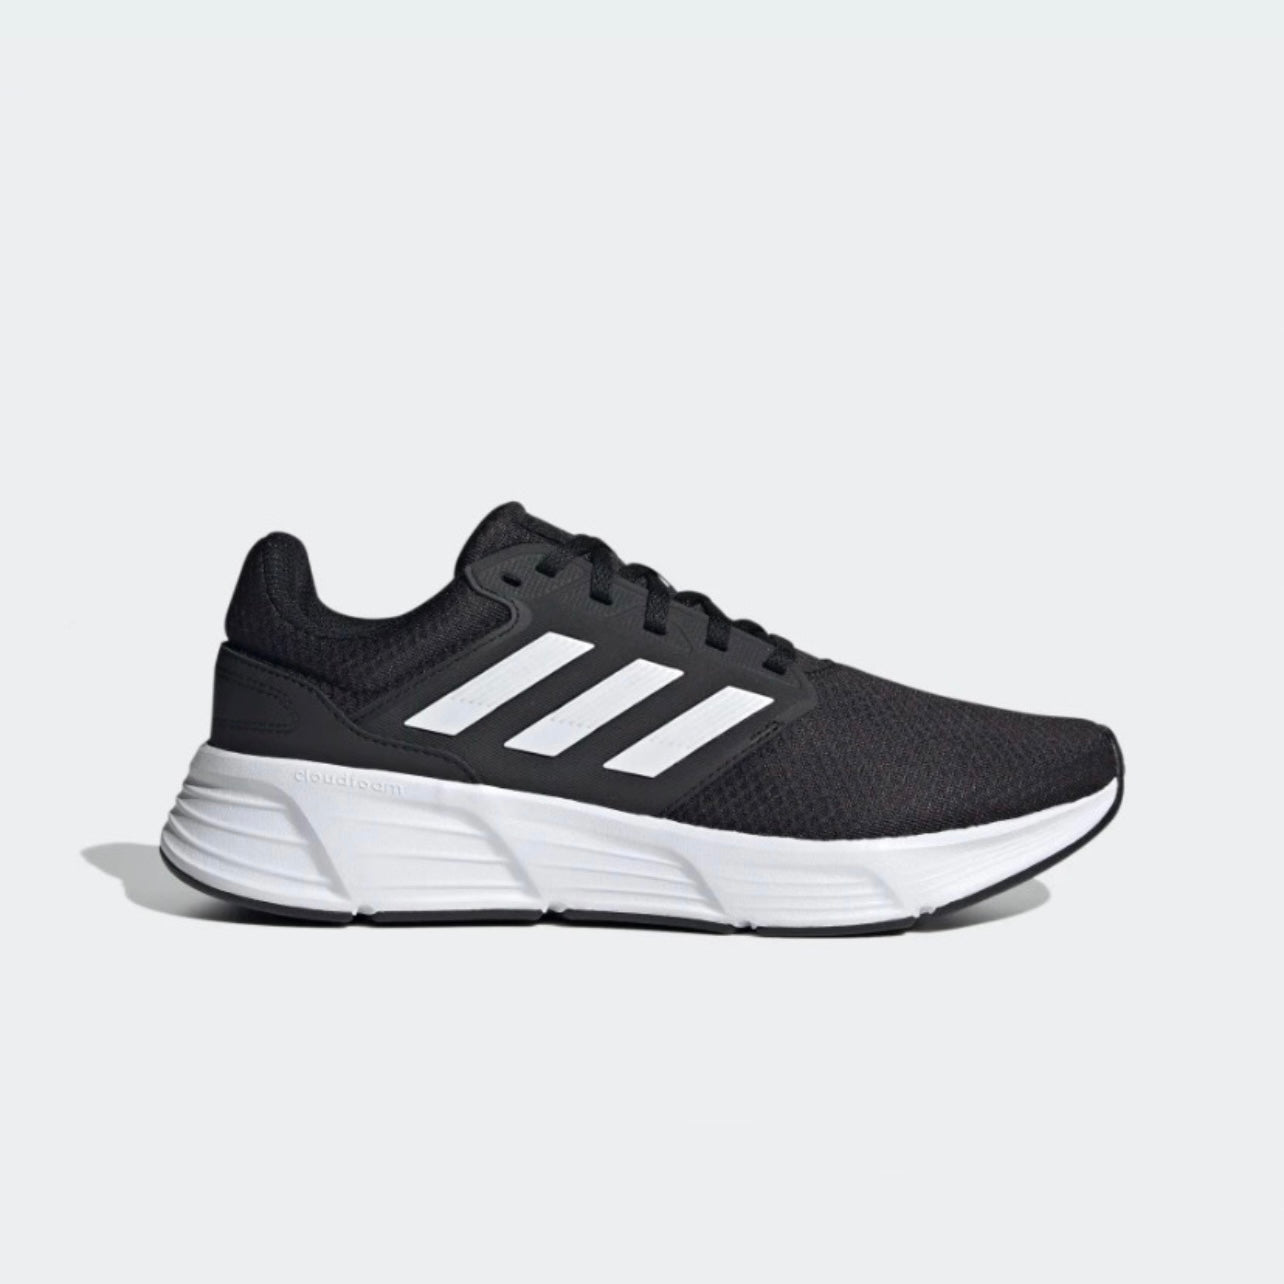 Adidas sneakers for men in black and white